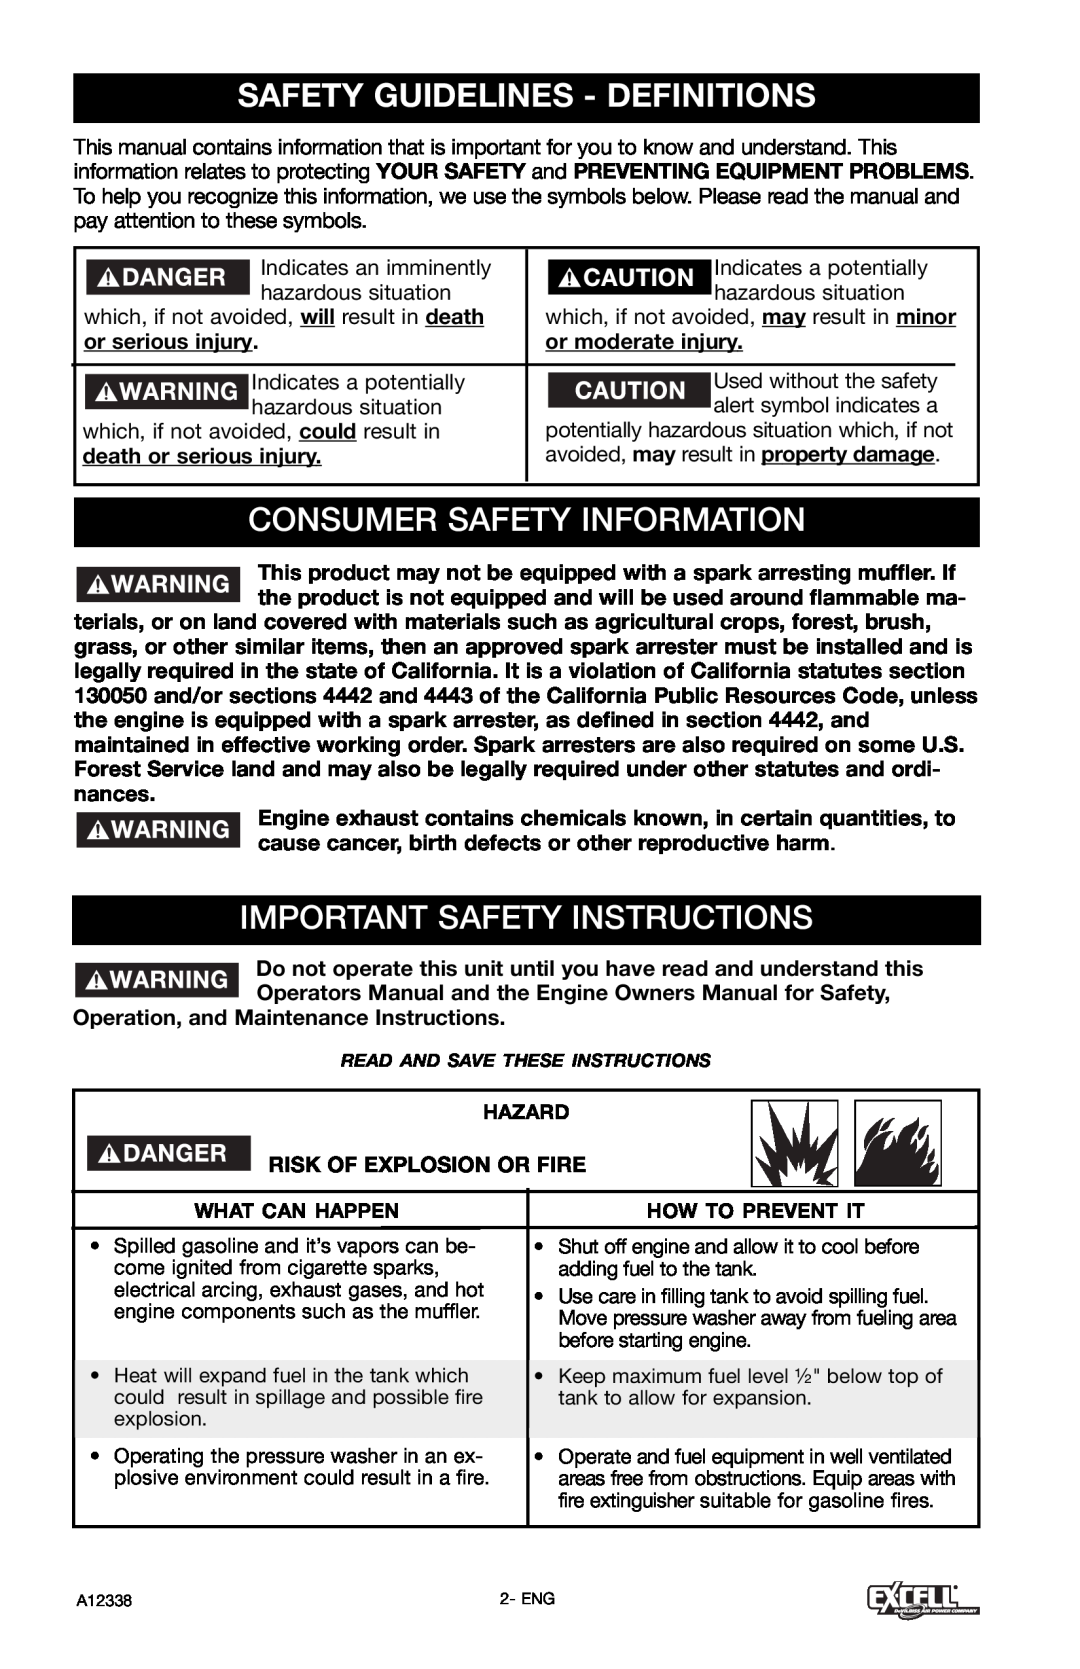 Excell Precision XR2750 Safety Guidelines - Definitions, Consumer Safety Information, Important Safety Instructions 